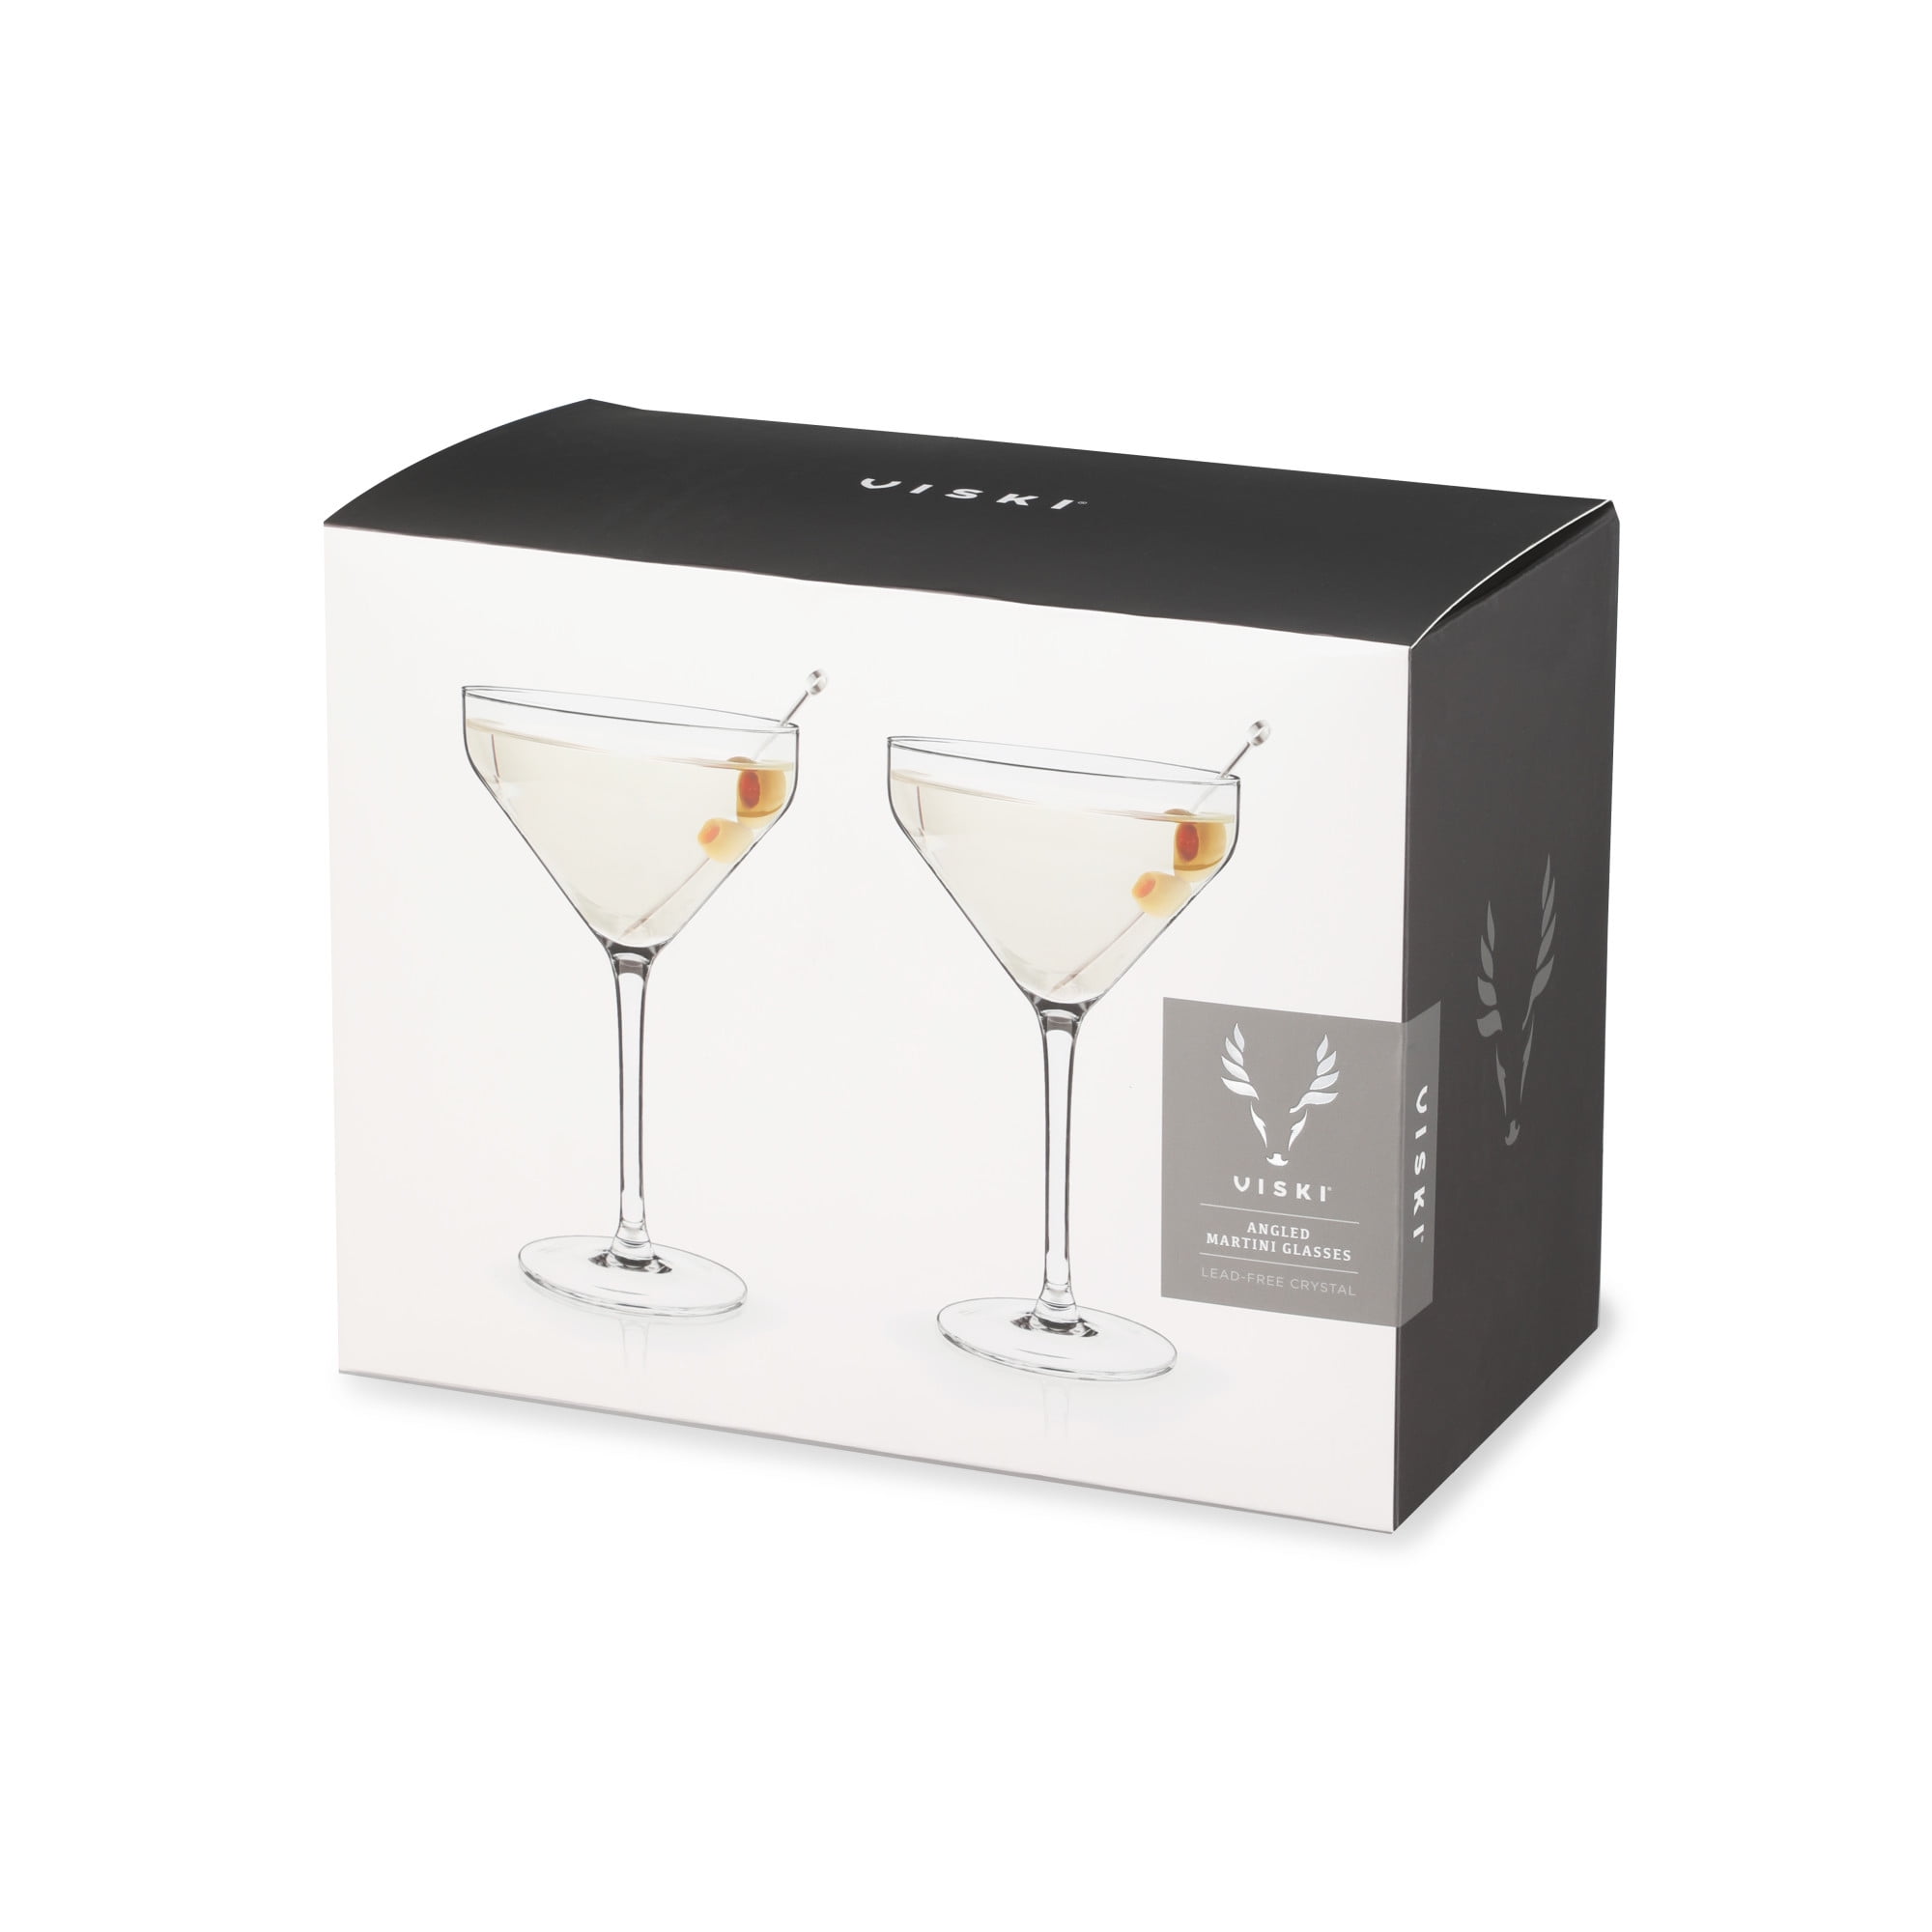 Viski Faceted Martini Glasses, Preium Crystaal Cocktail Coupe Glasses, Home  and Bar Drinkware, Stemm…See more Viski Faceted Martini Glasses, Preium